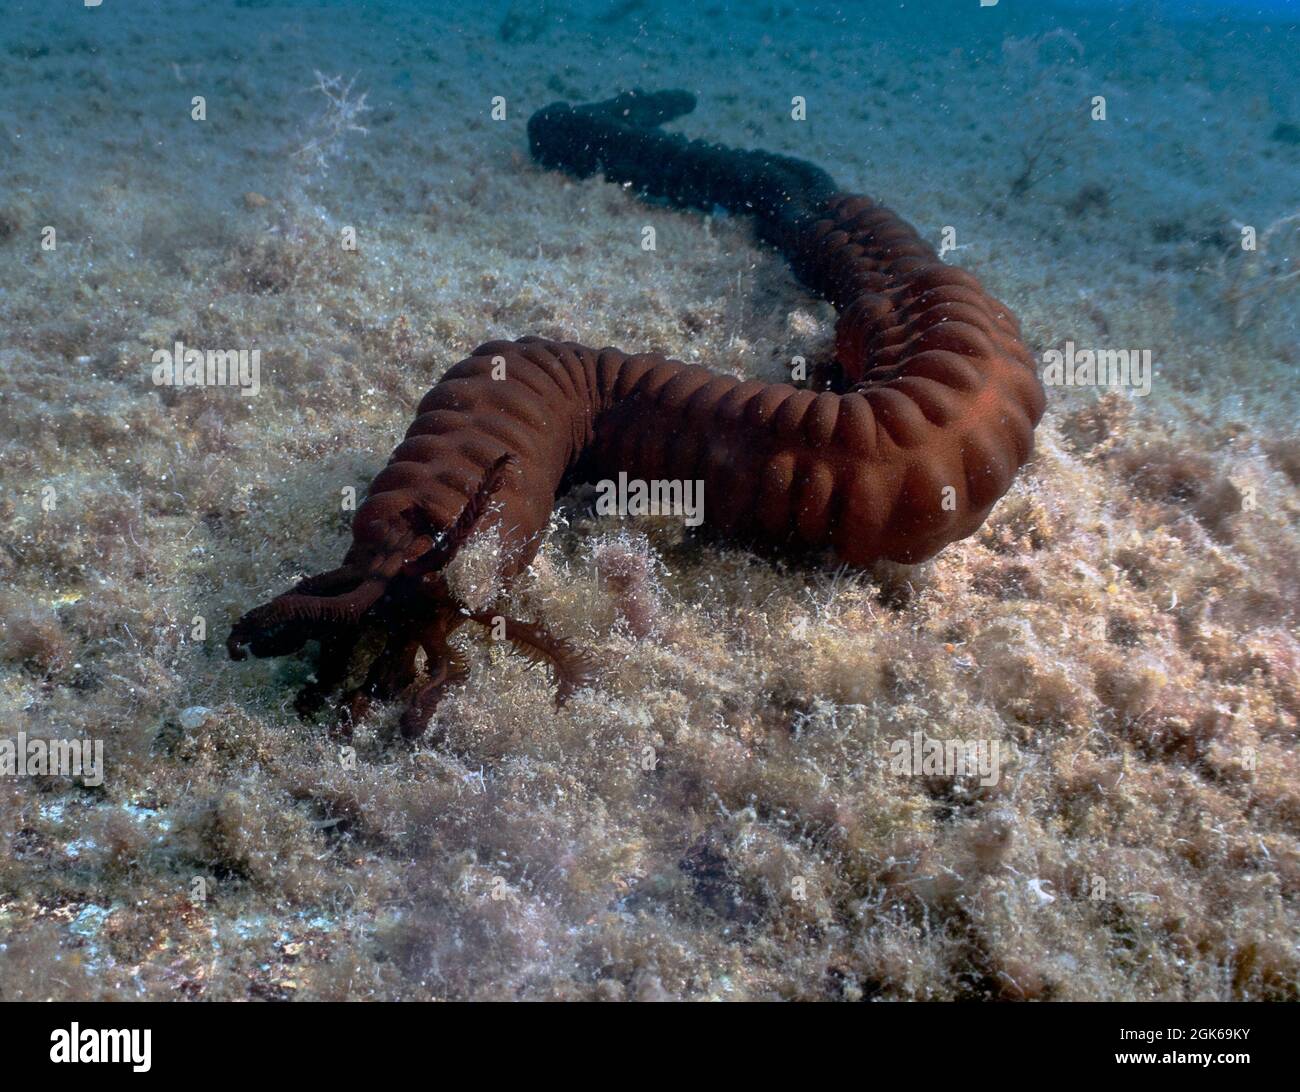 The Synaptula reciprocans sea cucumber was only discovered in the Mediterranean Sea in 1986. This specimen was found in Cyprus. Stock Photo